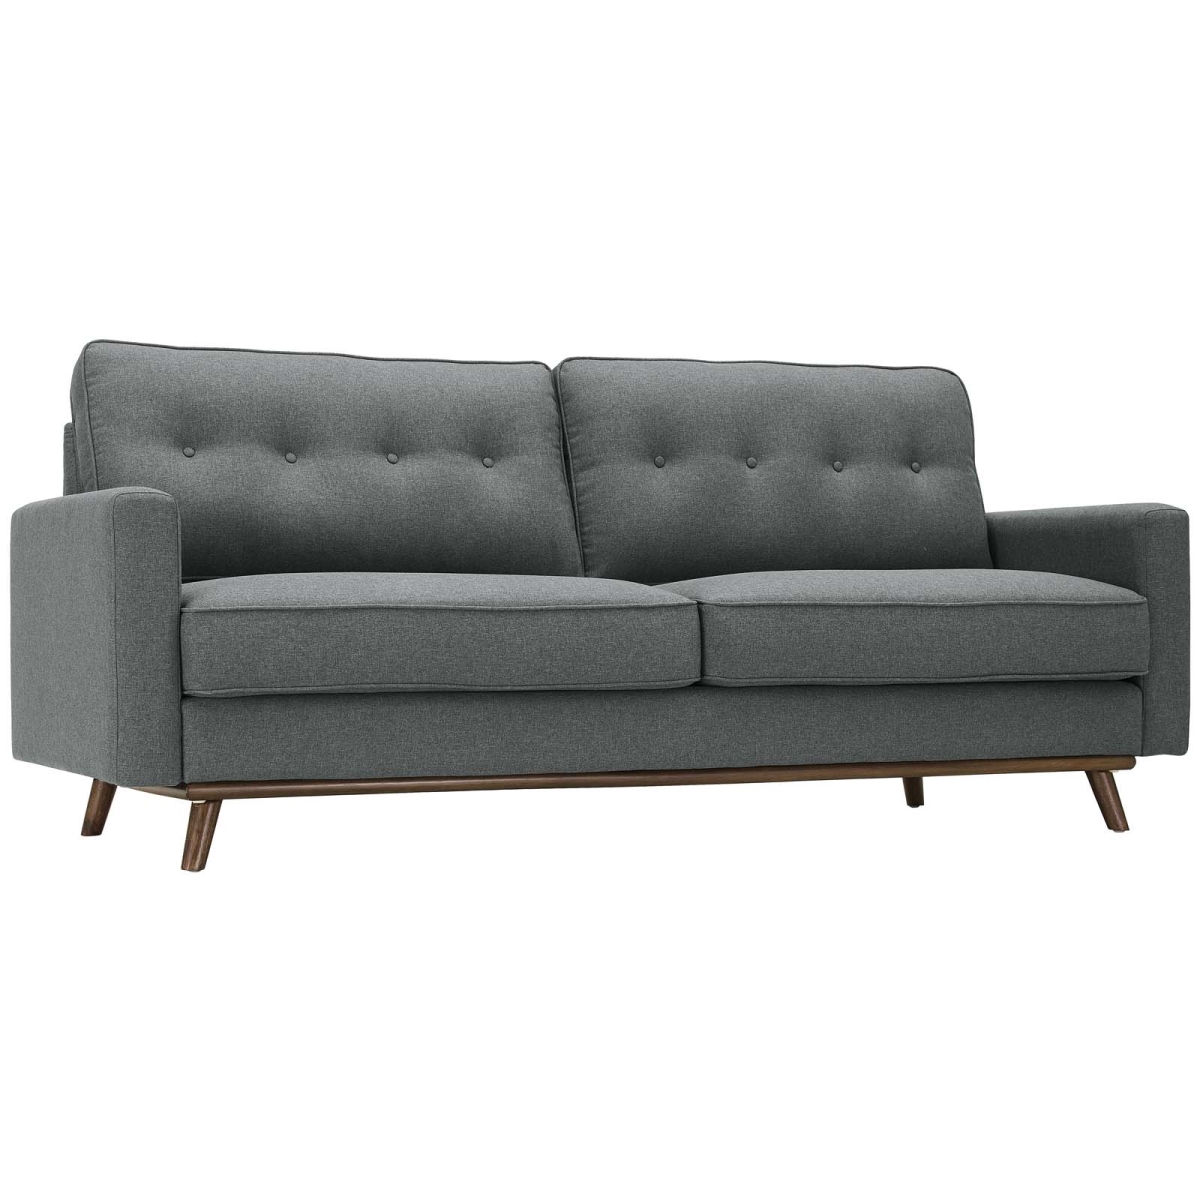 Eei-3046-gry Prompt Upholstered Fabric Sofa - Gray, 36 X 82 X 34 In.